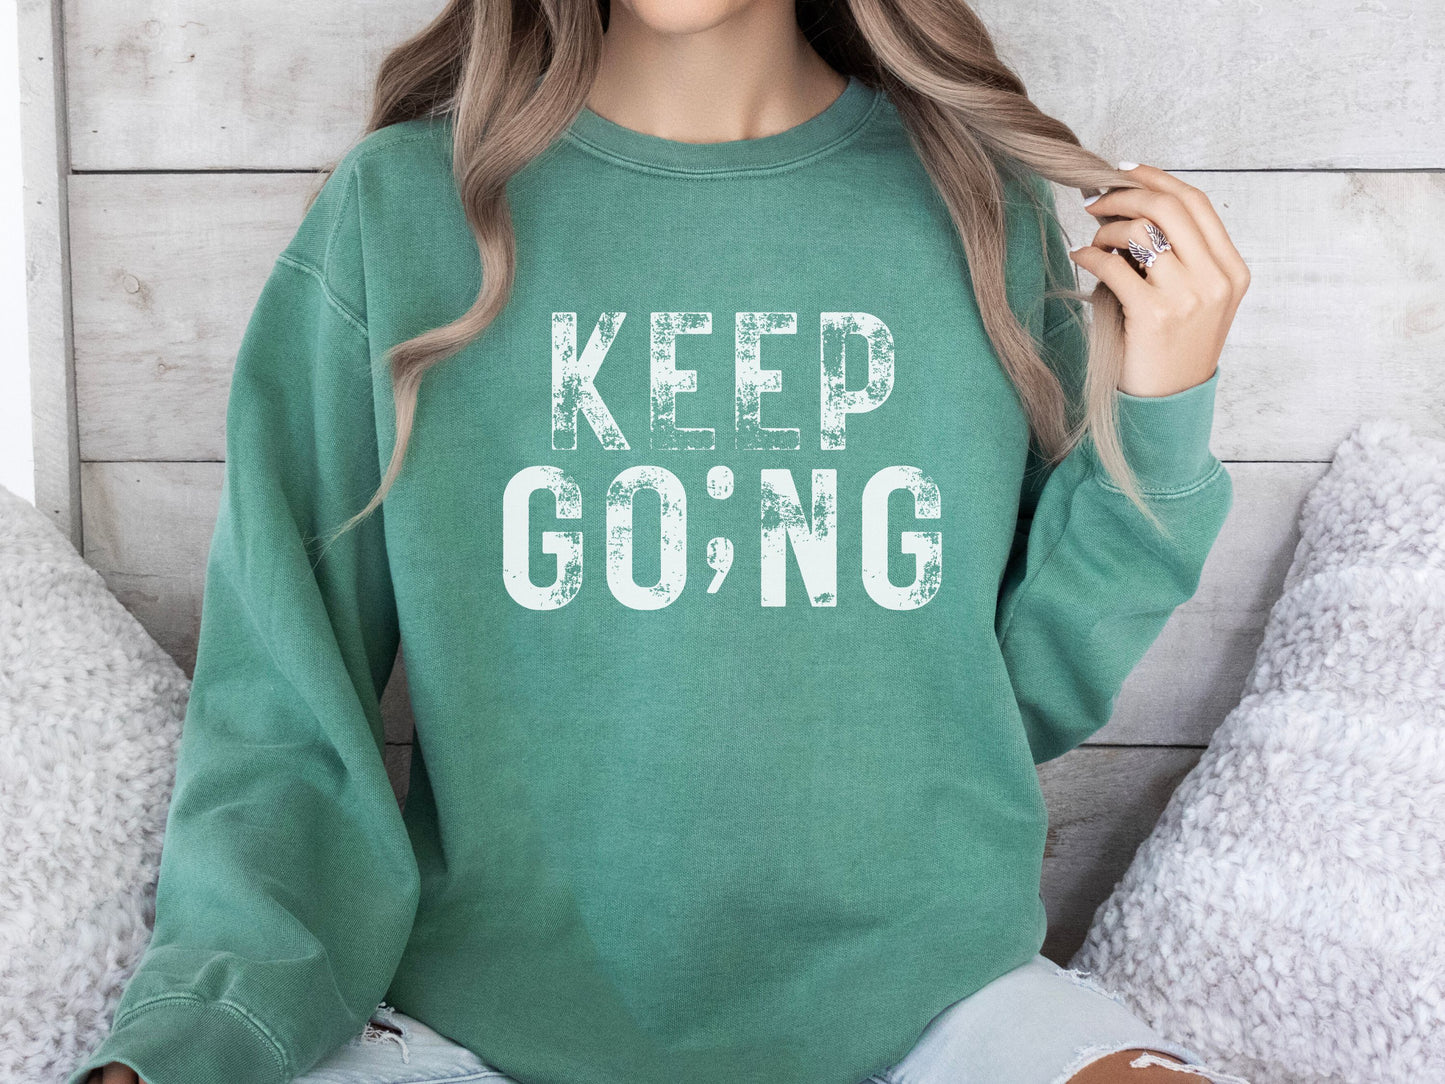 Comfort Colors Sweatshirt - "Keep Going" - Motivational Apparel for Everyday Inspiration